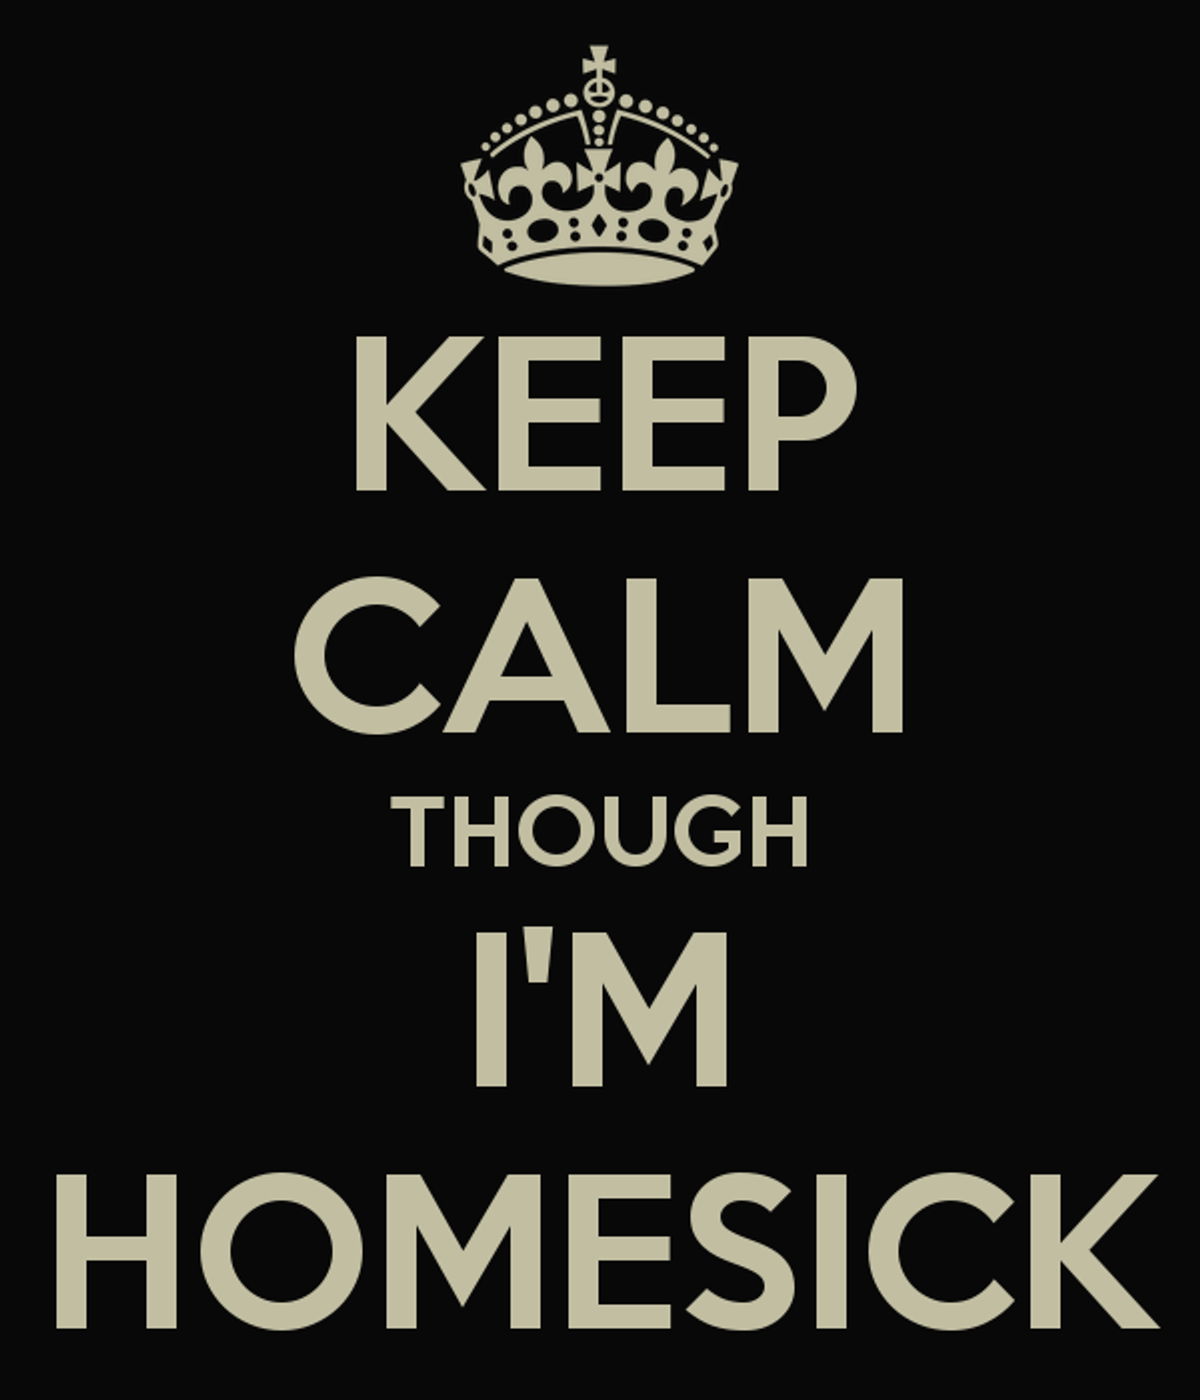 How To Deal With Homesickness